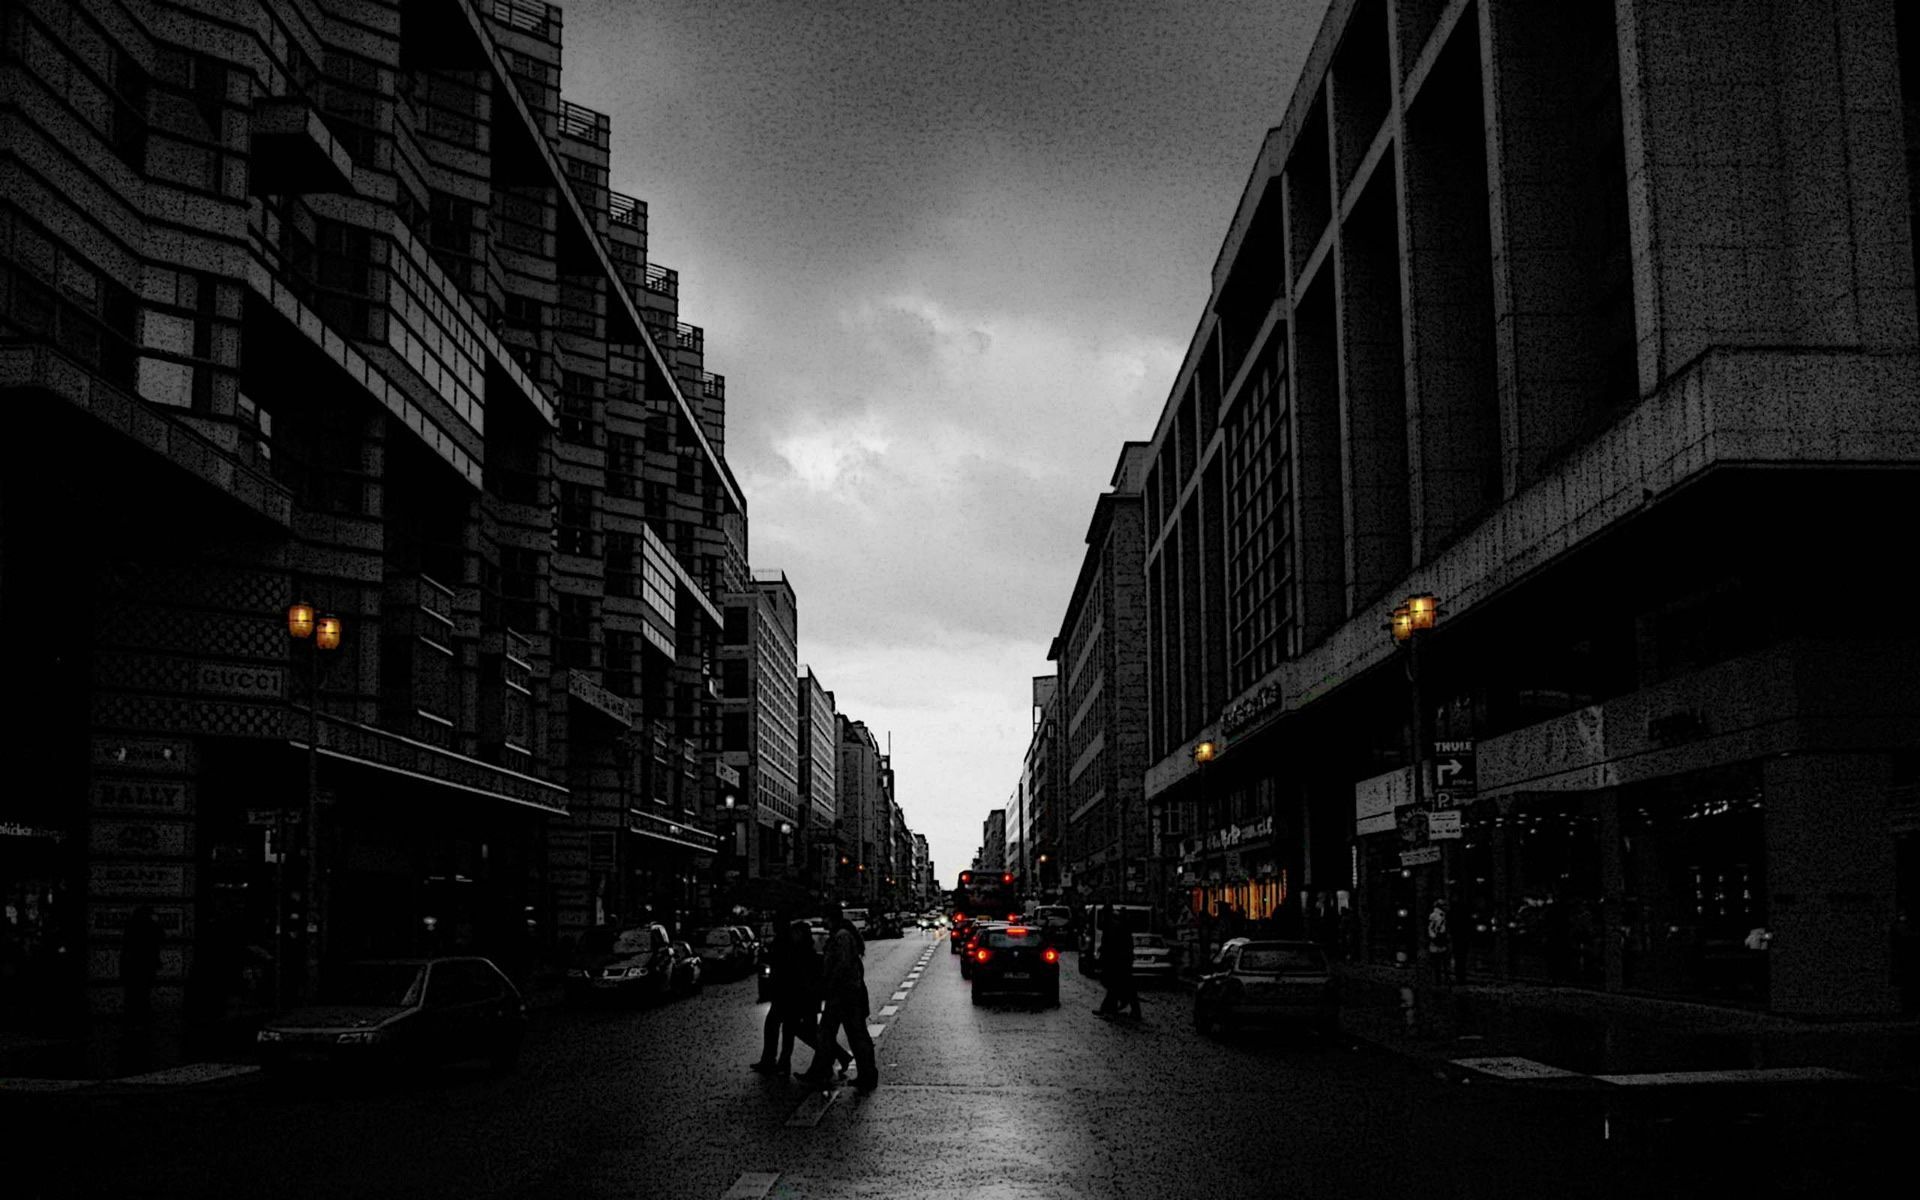 Berlin Germany. Dark streets on a cloudy day